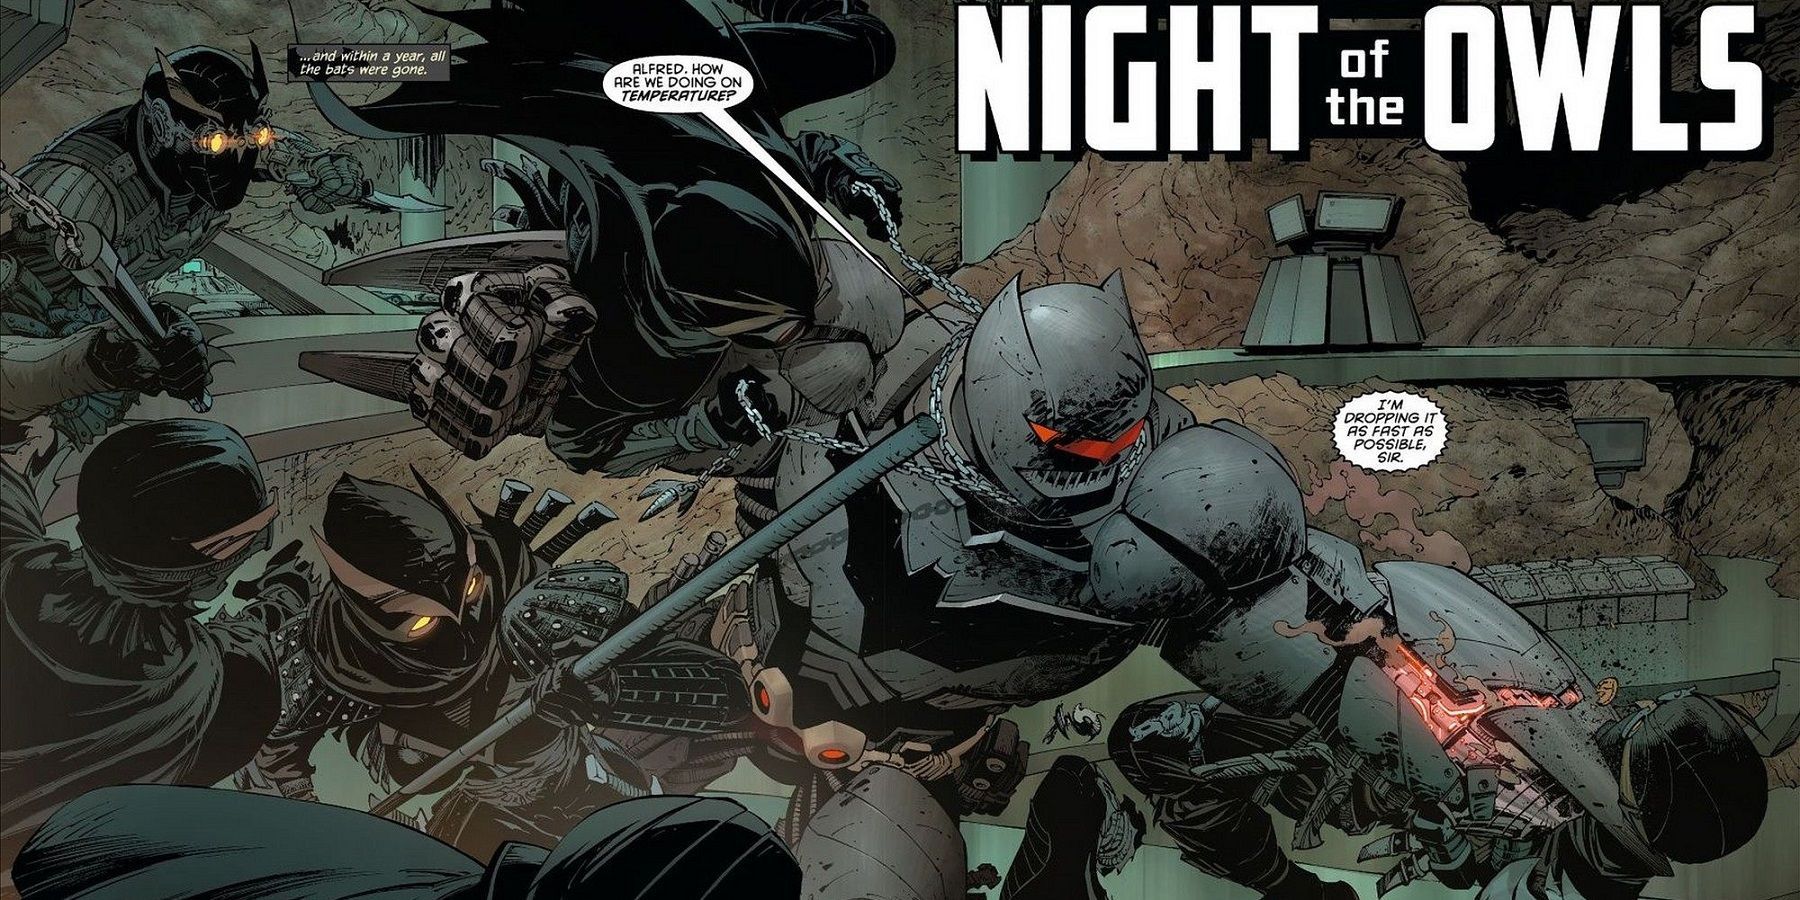 Batman in high tech armor fighting the Court of Owls' Talons